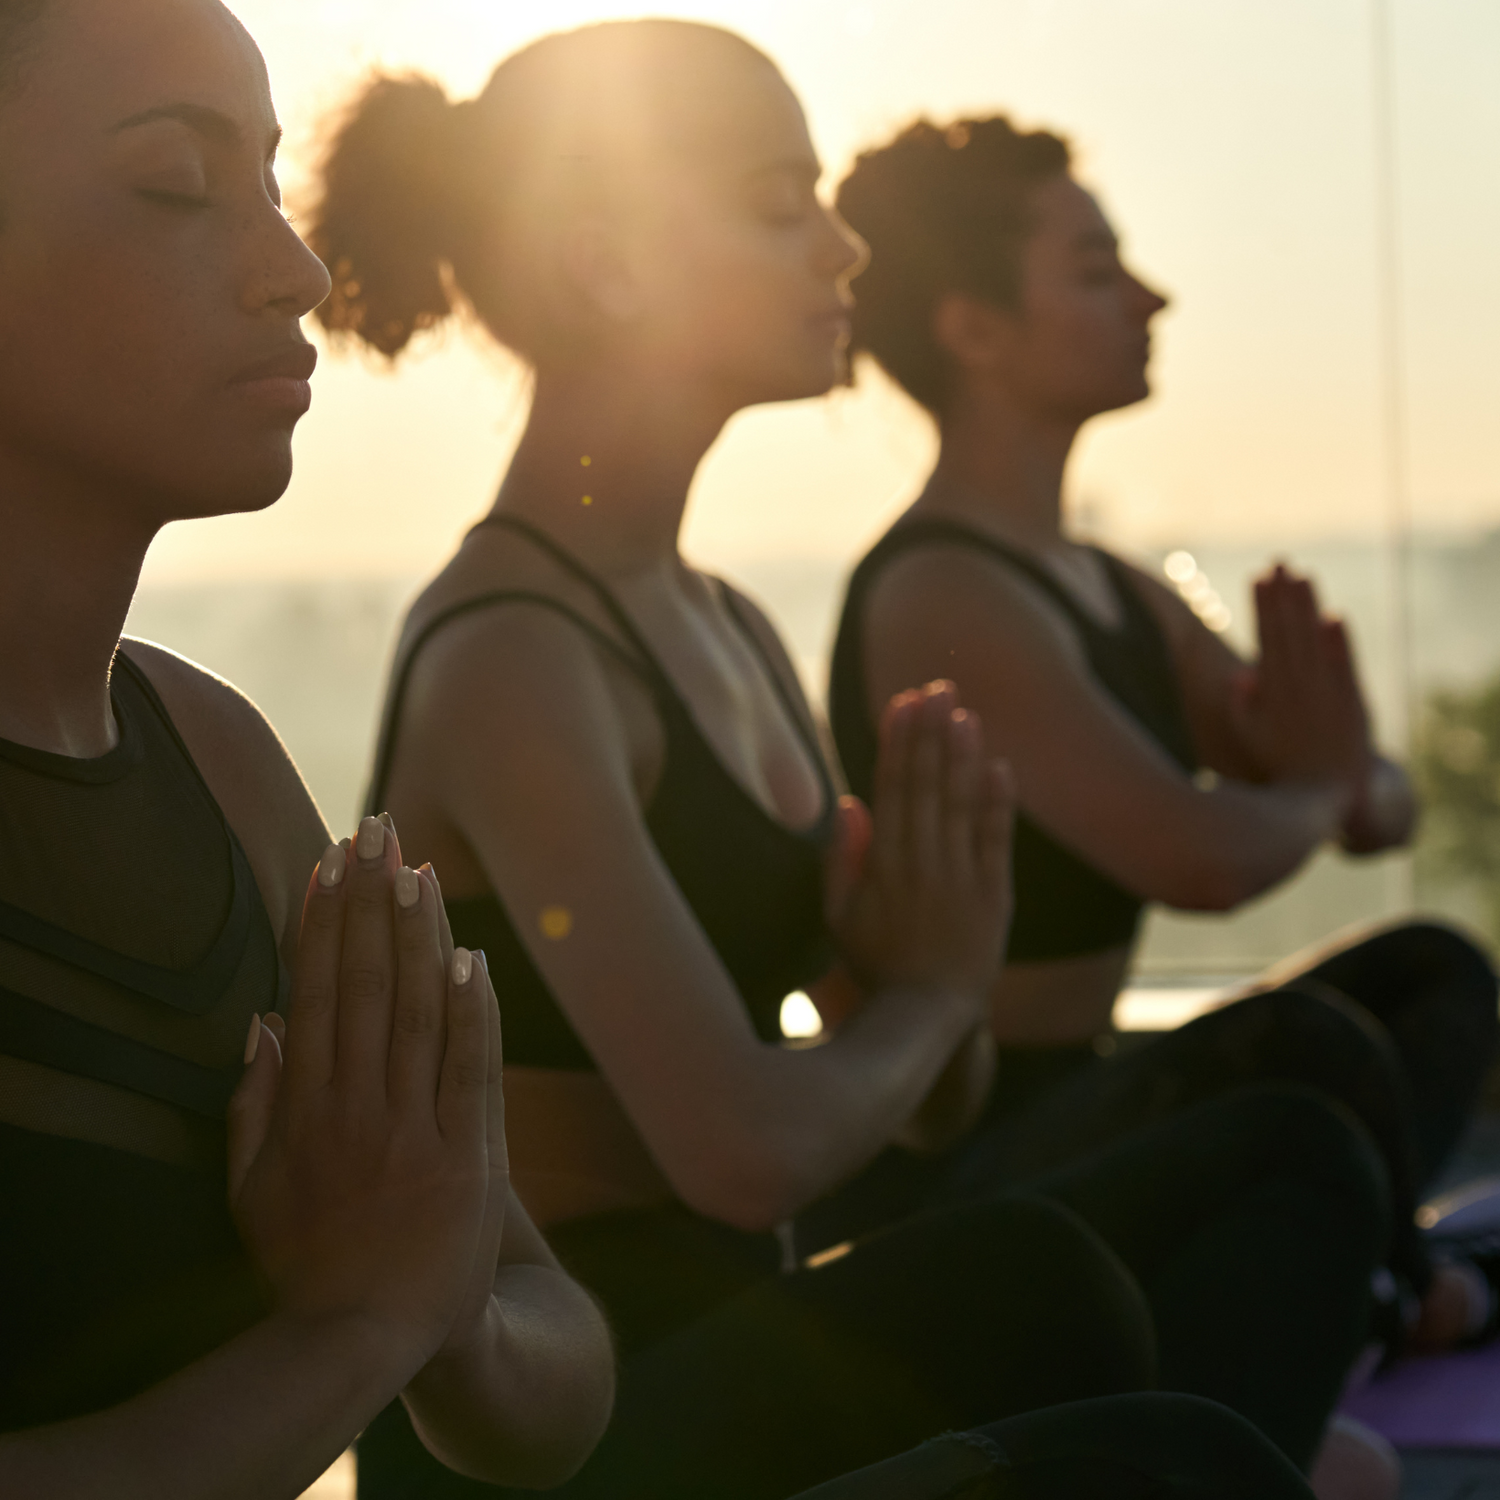 Three women sitting cross-legged in meditation pose, silhouetted against a golden sunrise with their eyes closed and hands together at their chests.